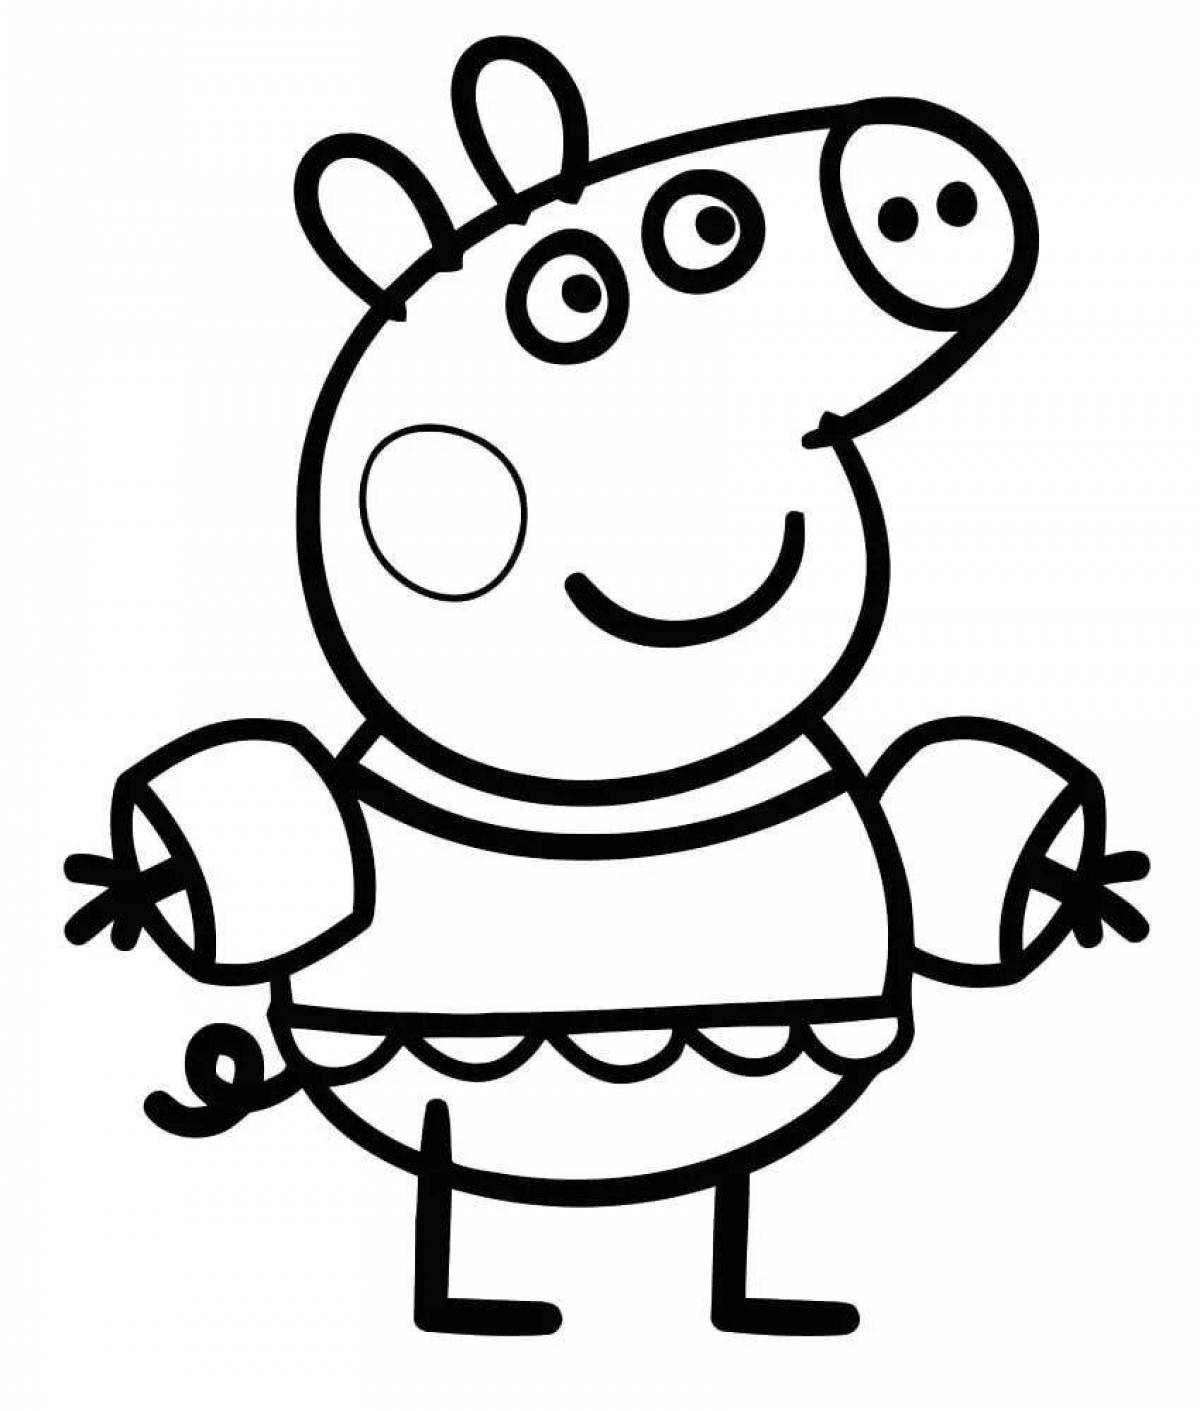 Adorable peppa pig coloring book for kids